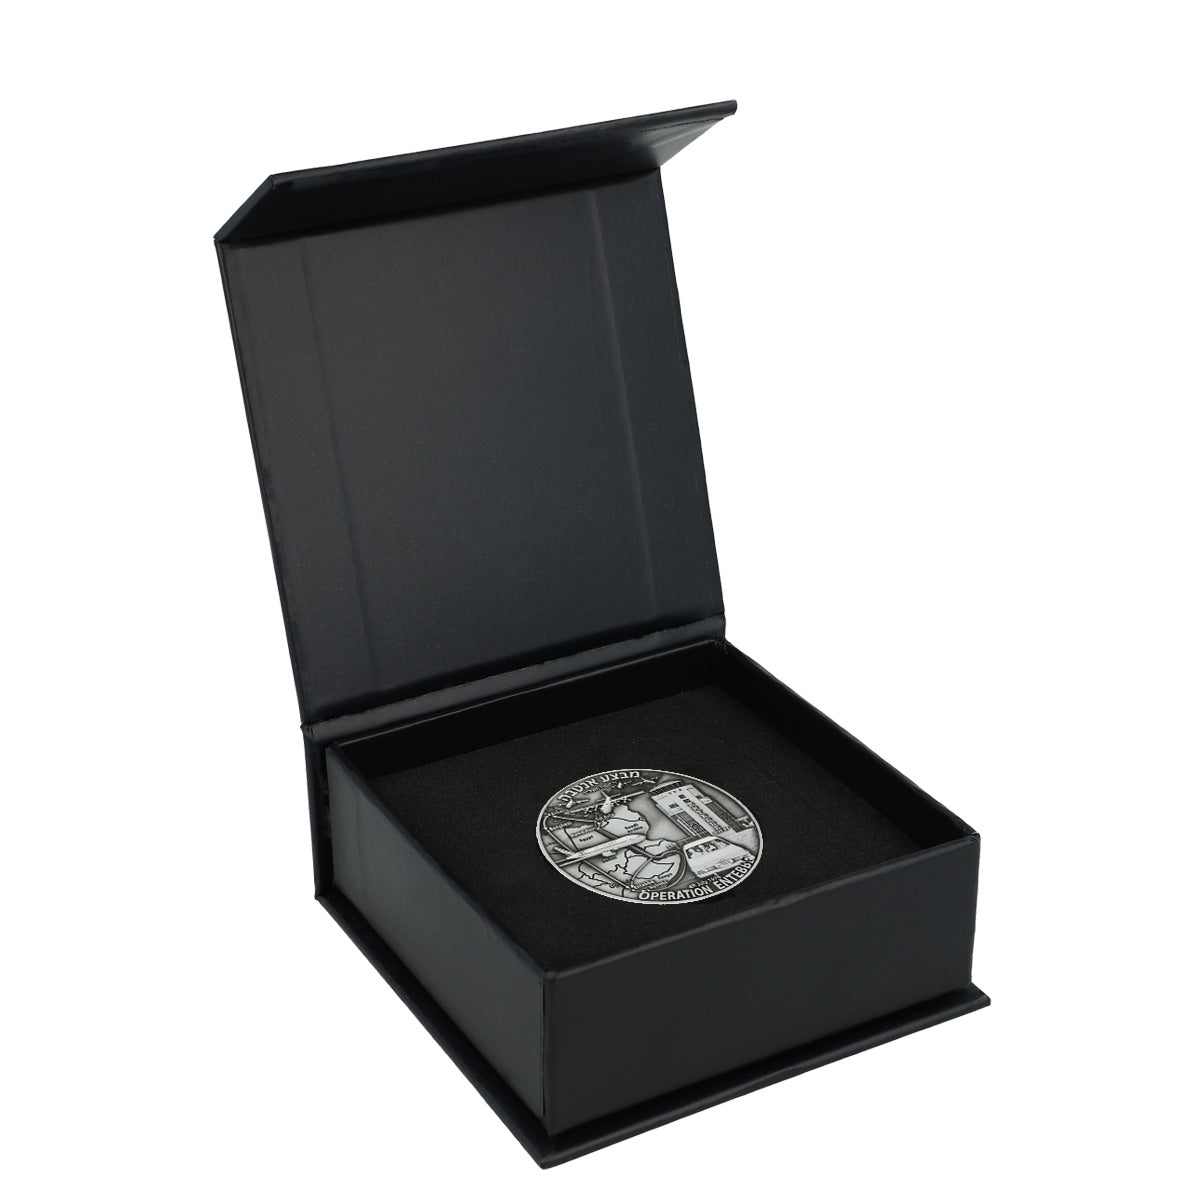 Operation Entebbe coin with box (5425662263446)